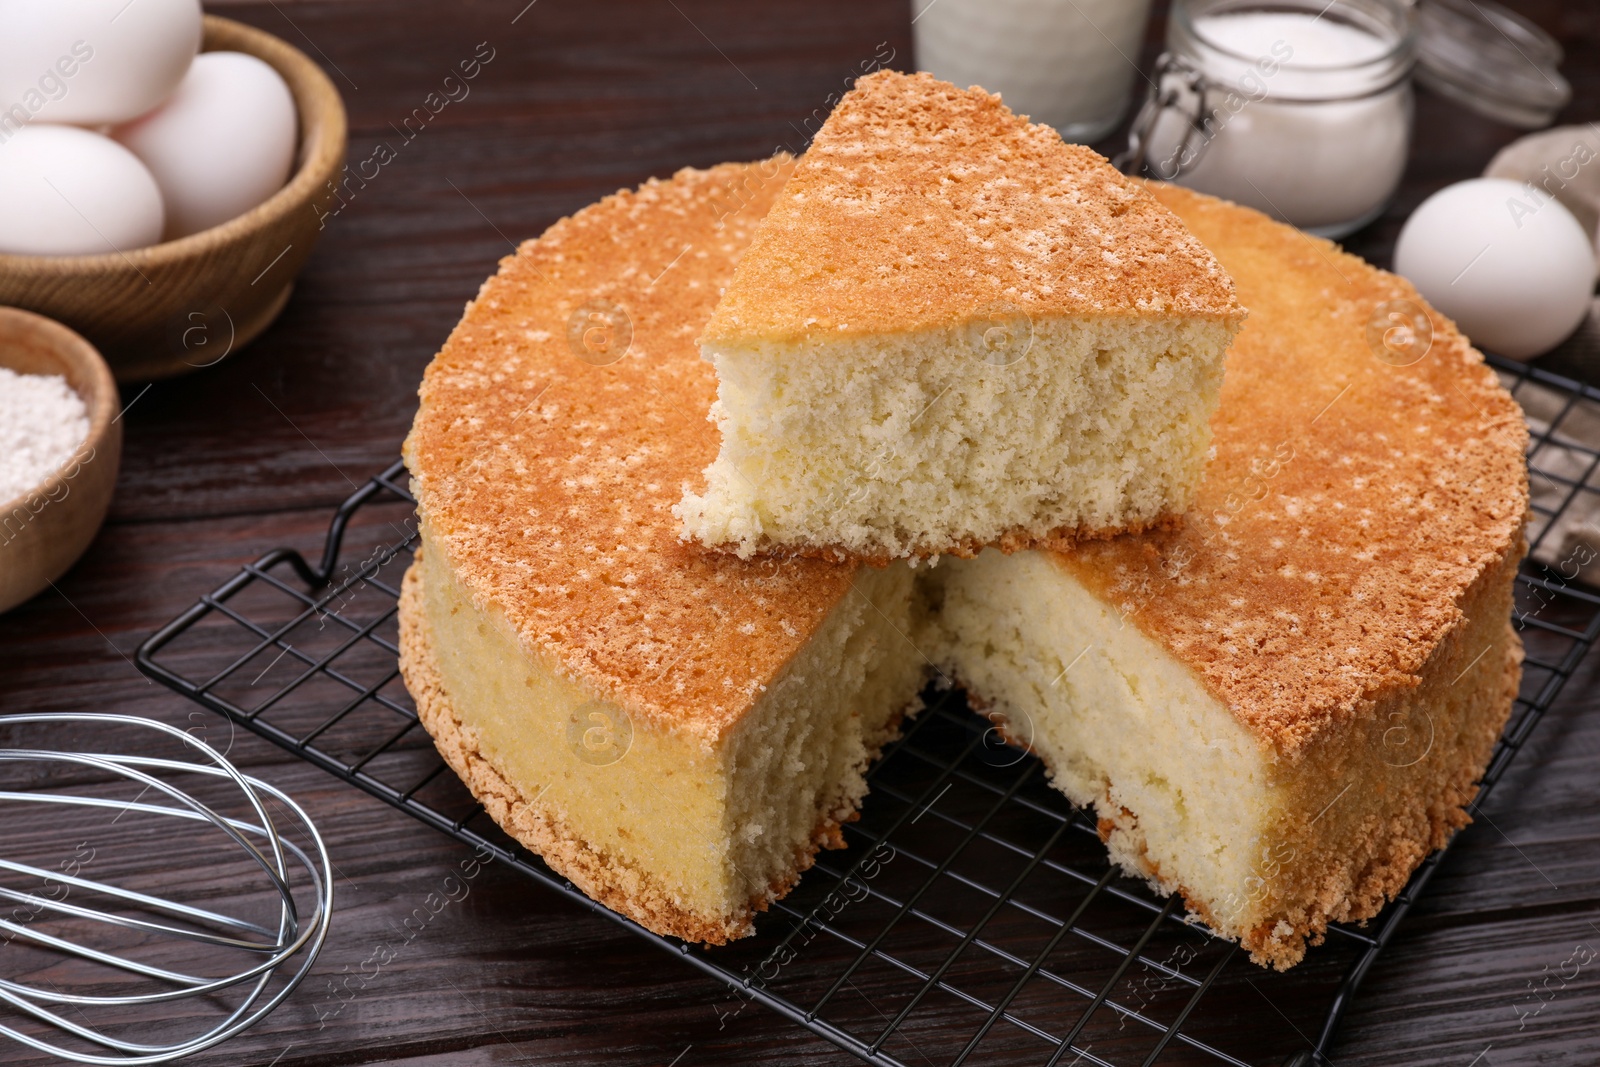 Photo of Tasty sponge cake and ingredients on wooden table, closeup